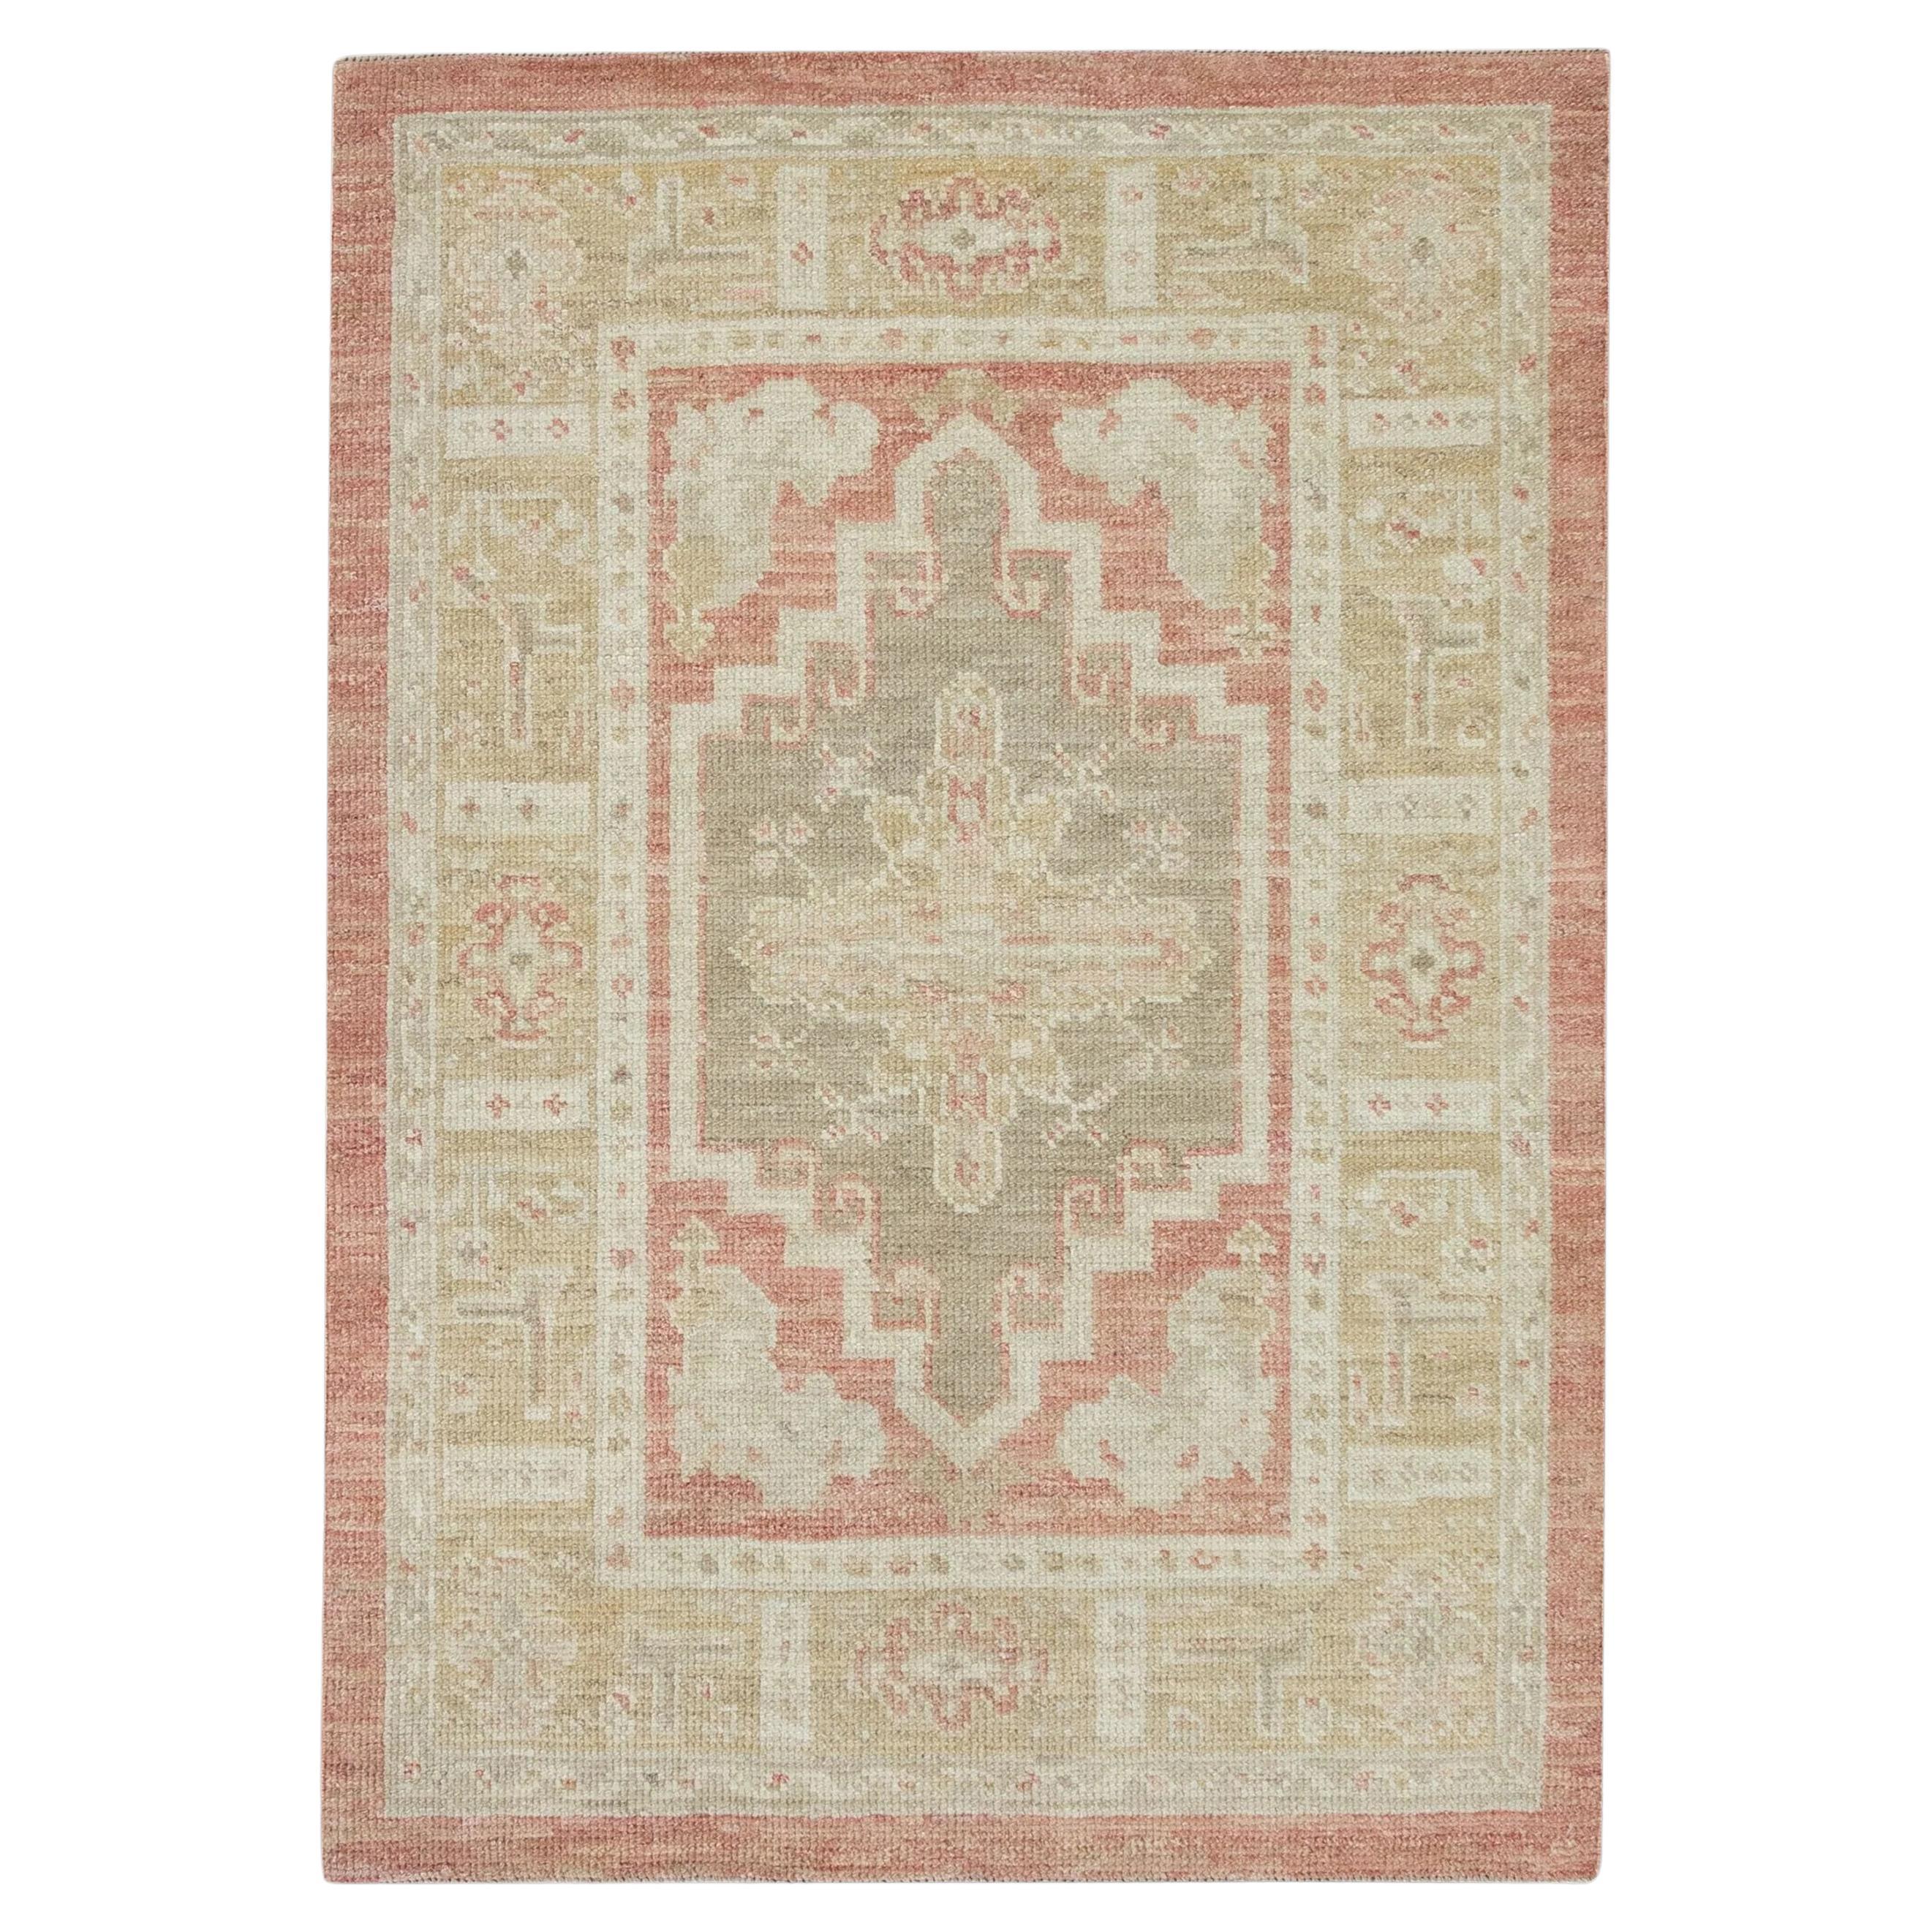 Red Handwoven Wool Turkish Oushak Rug with Medallion/Crest Design 2'11" x 4'3"